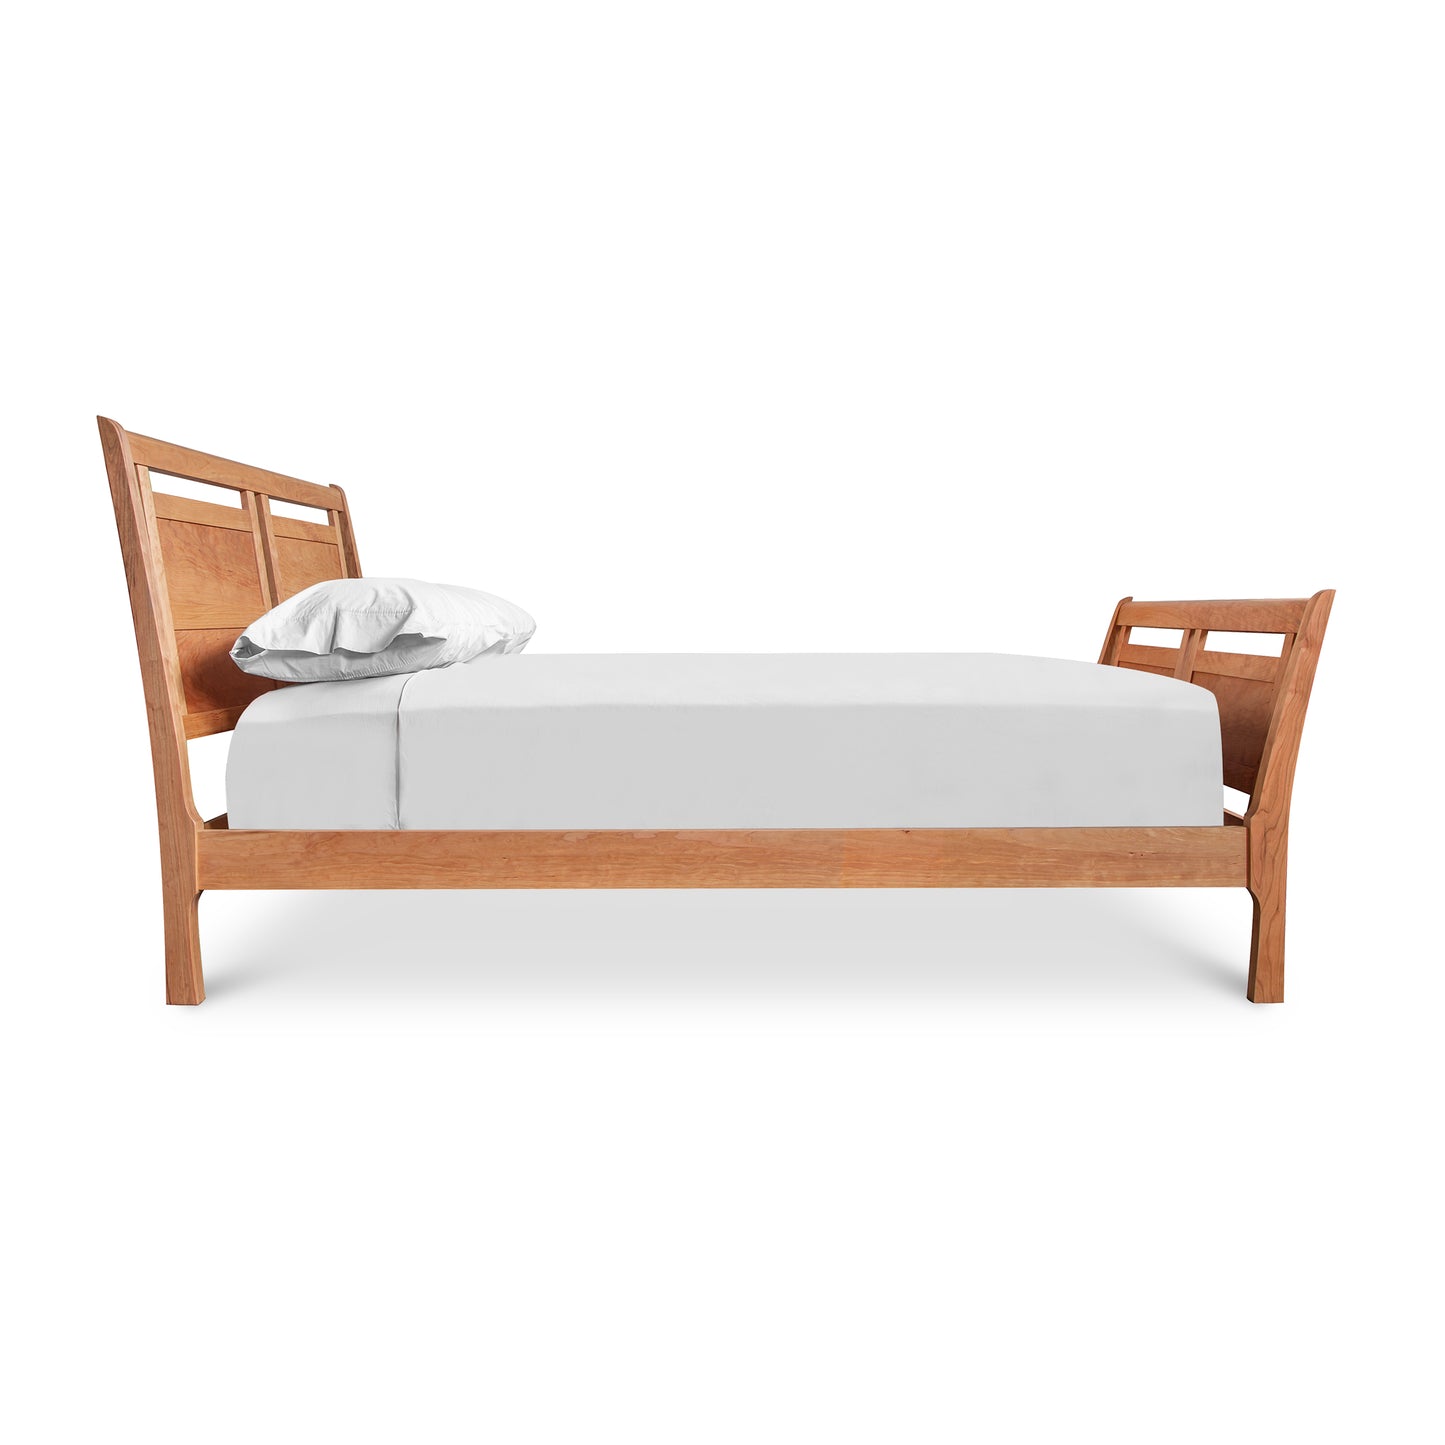 A handcrafted Vermont Furniture Designs Incline Sleigh Bed with a white mattress and a single pillow against a white background.